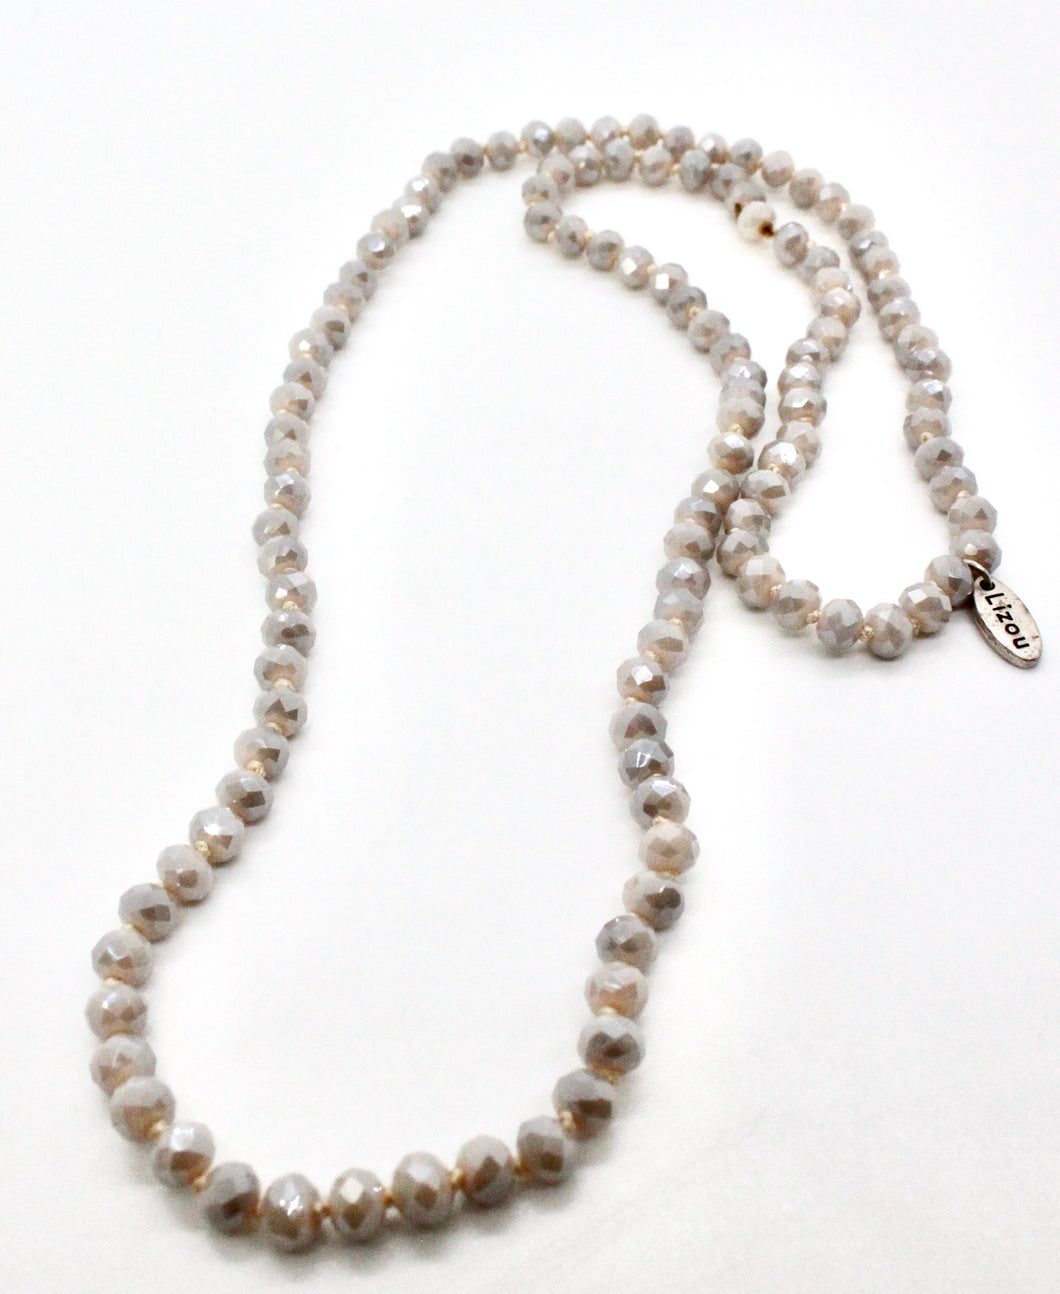 Long Plain White Crystal Necklace Hand Knotted - NL-CR